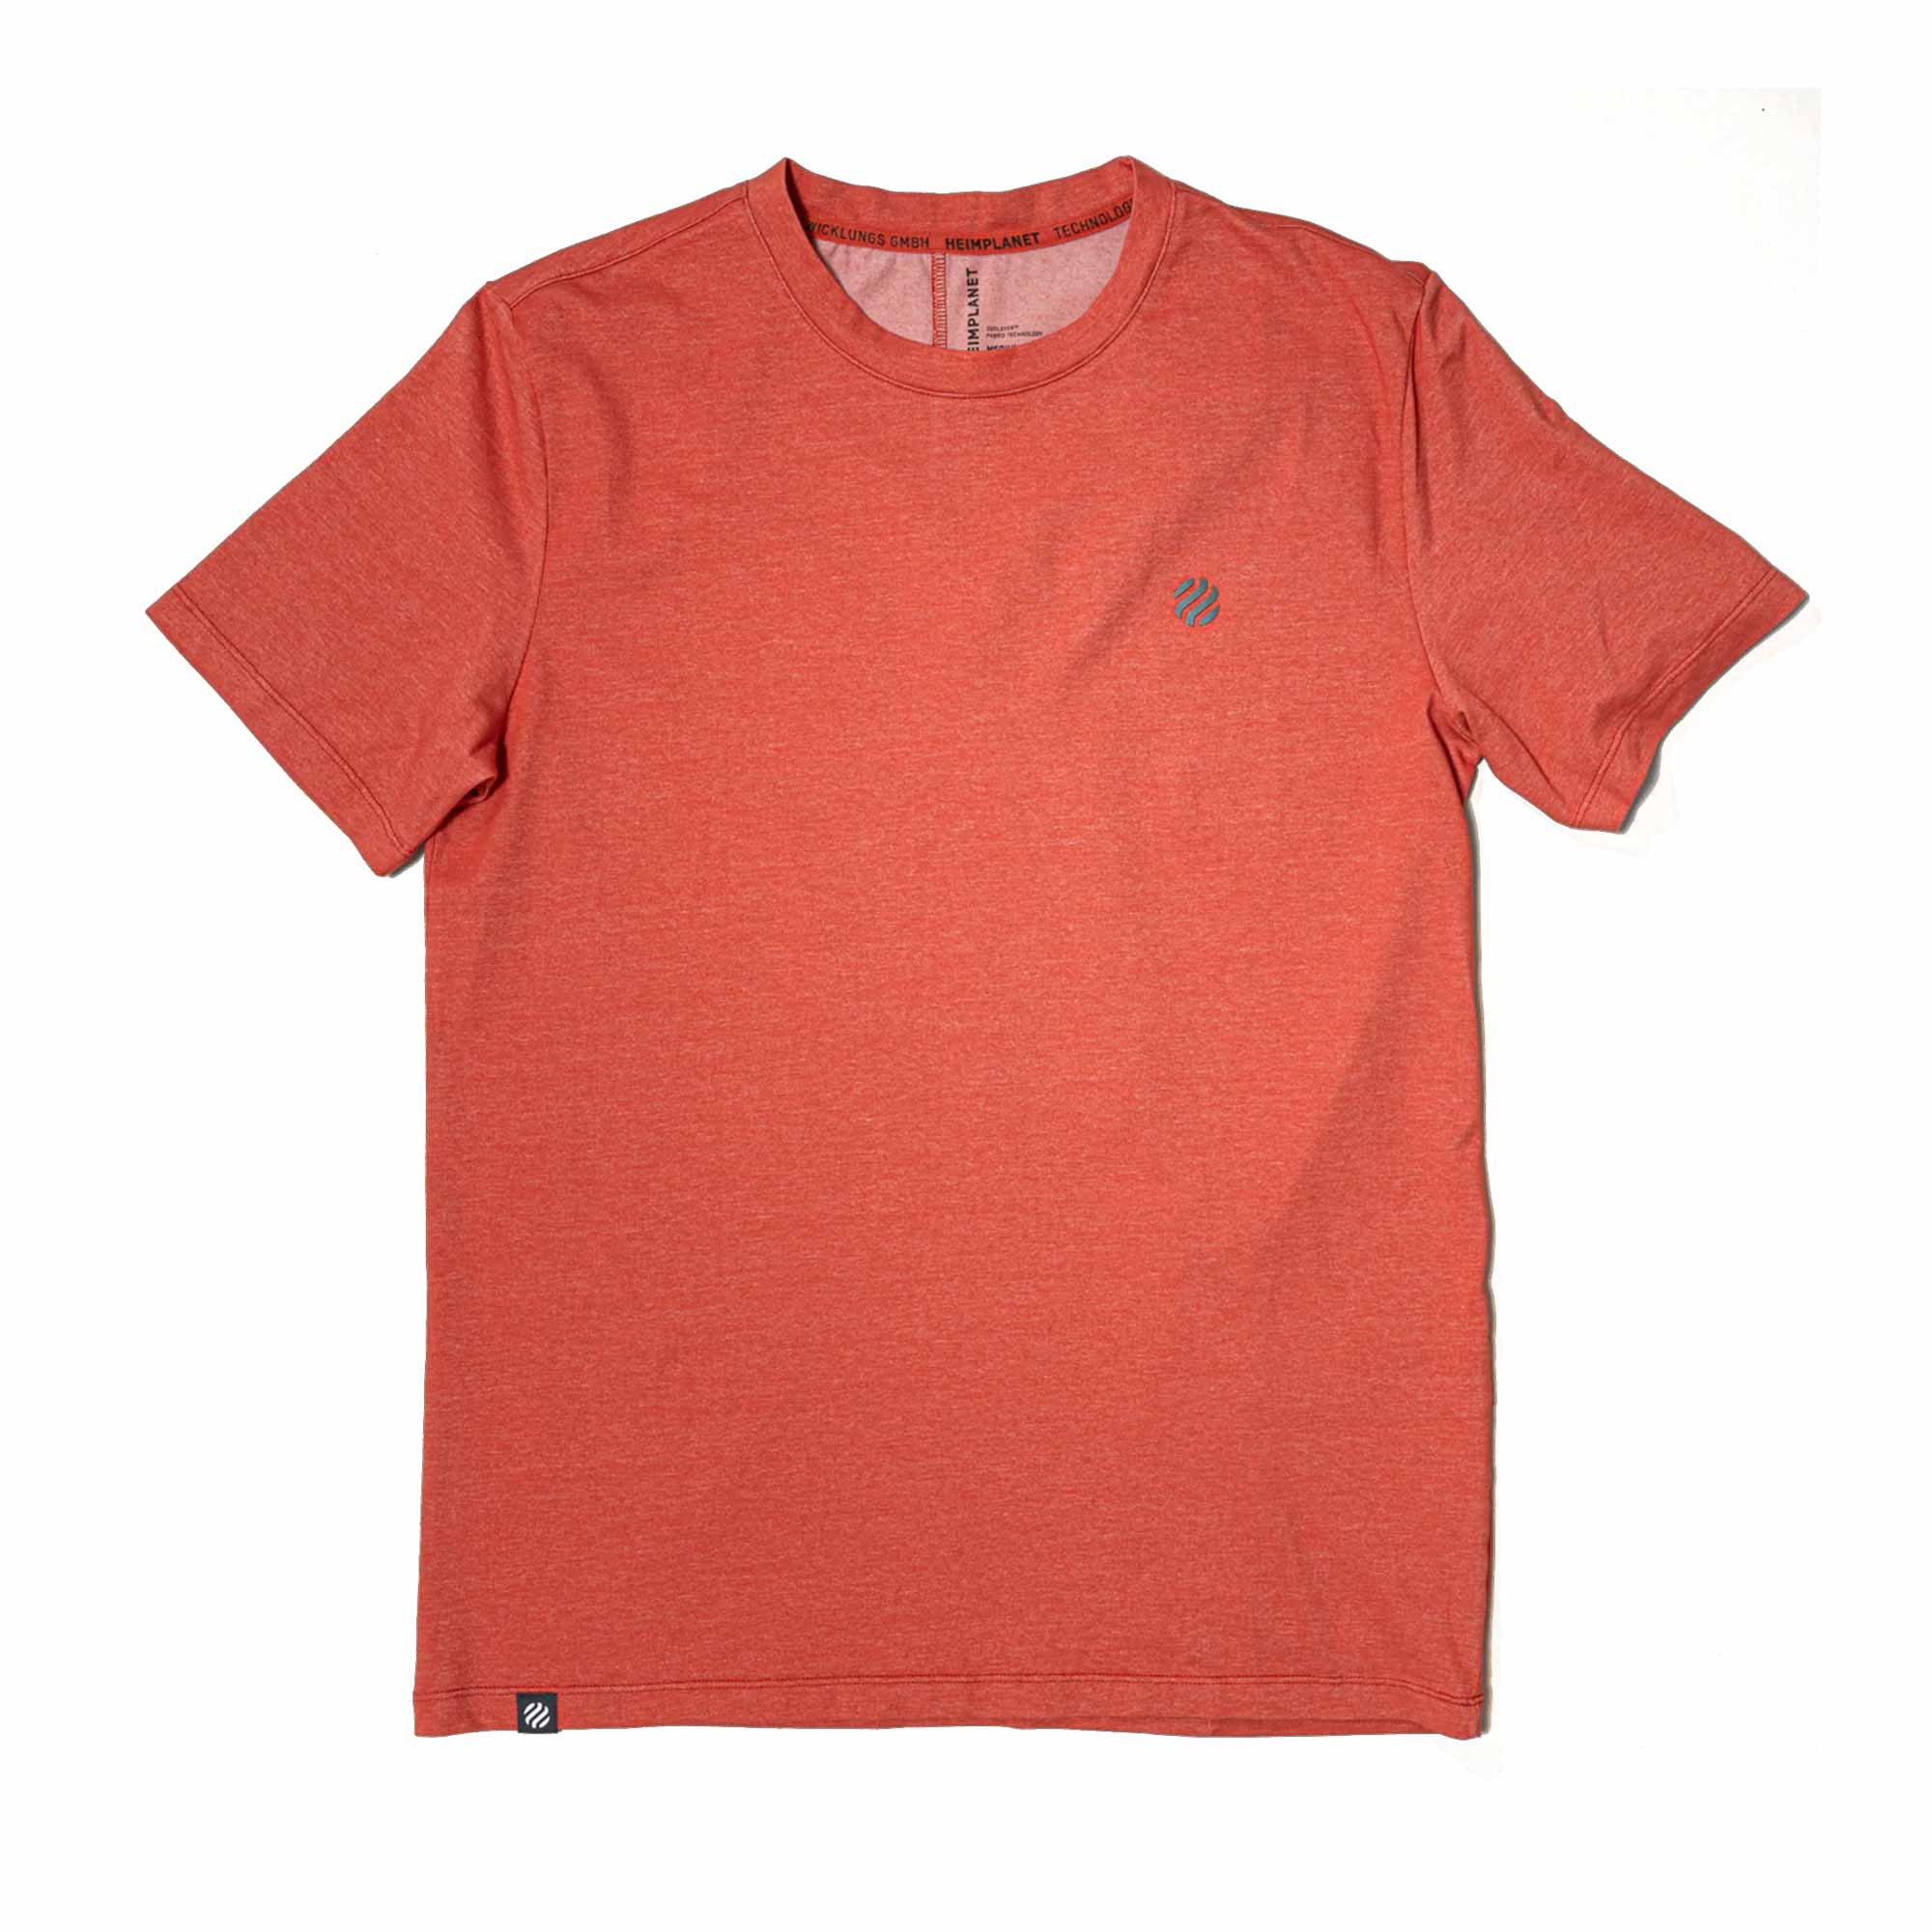 COOLEVER T-Shirt Overdye, red